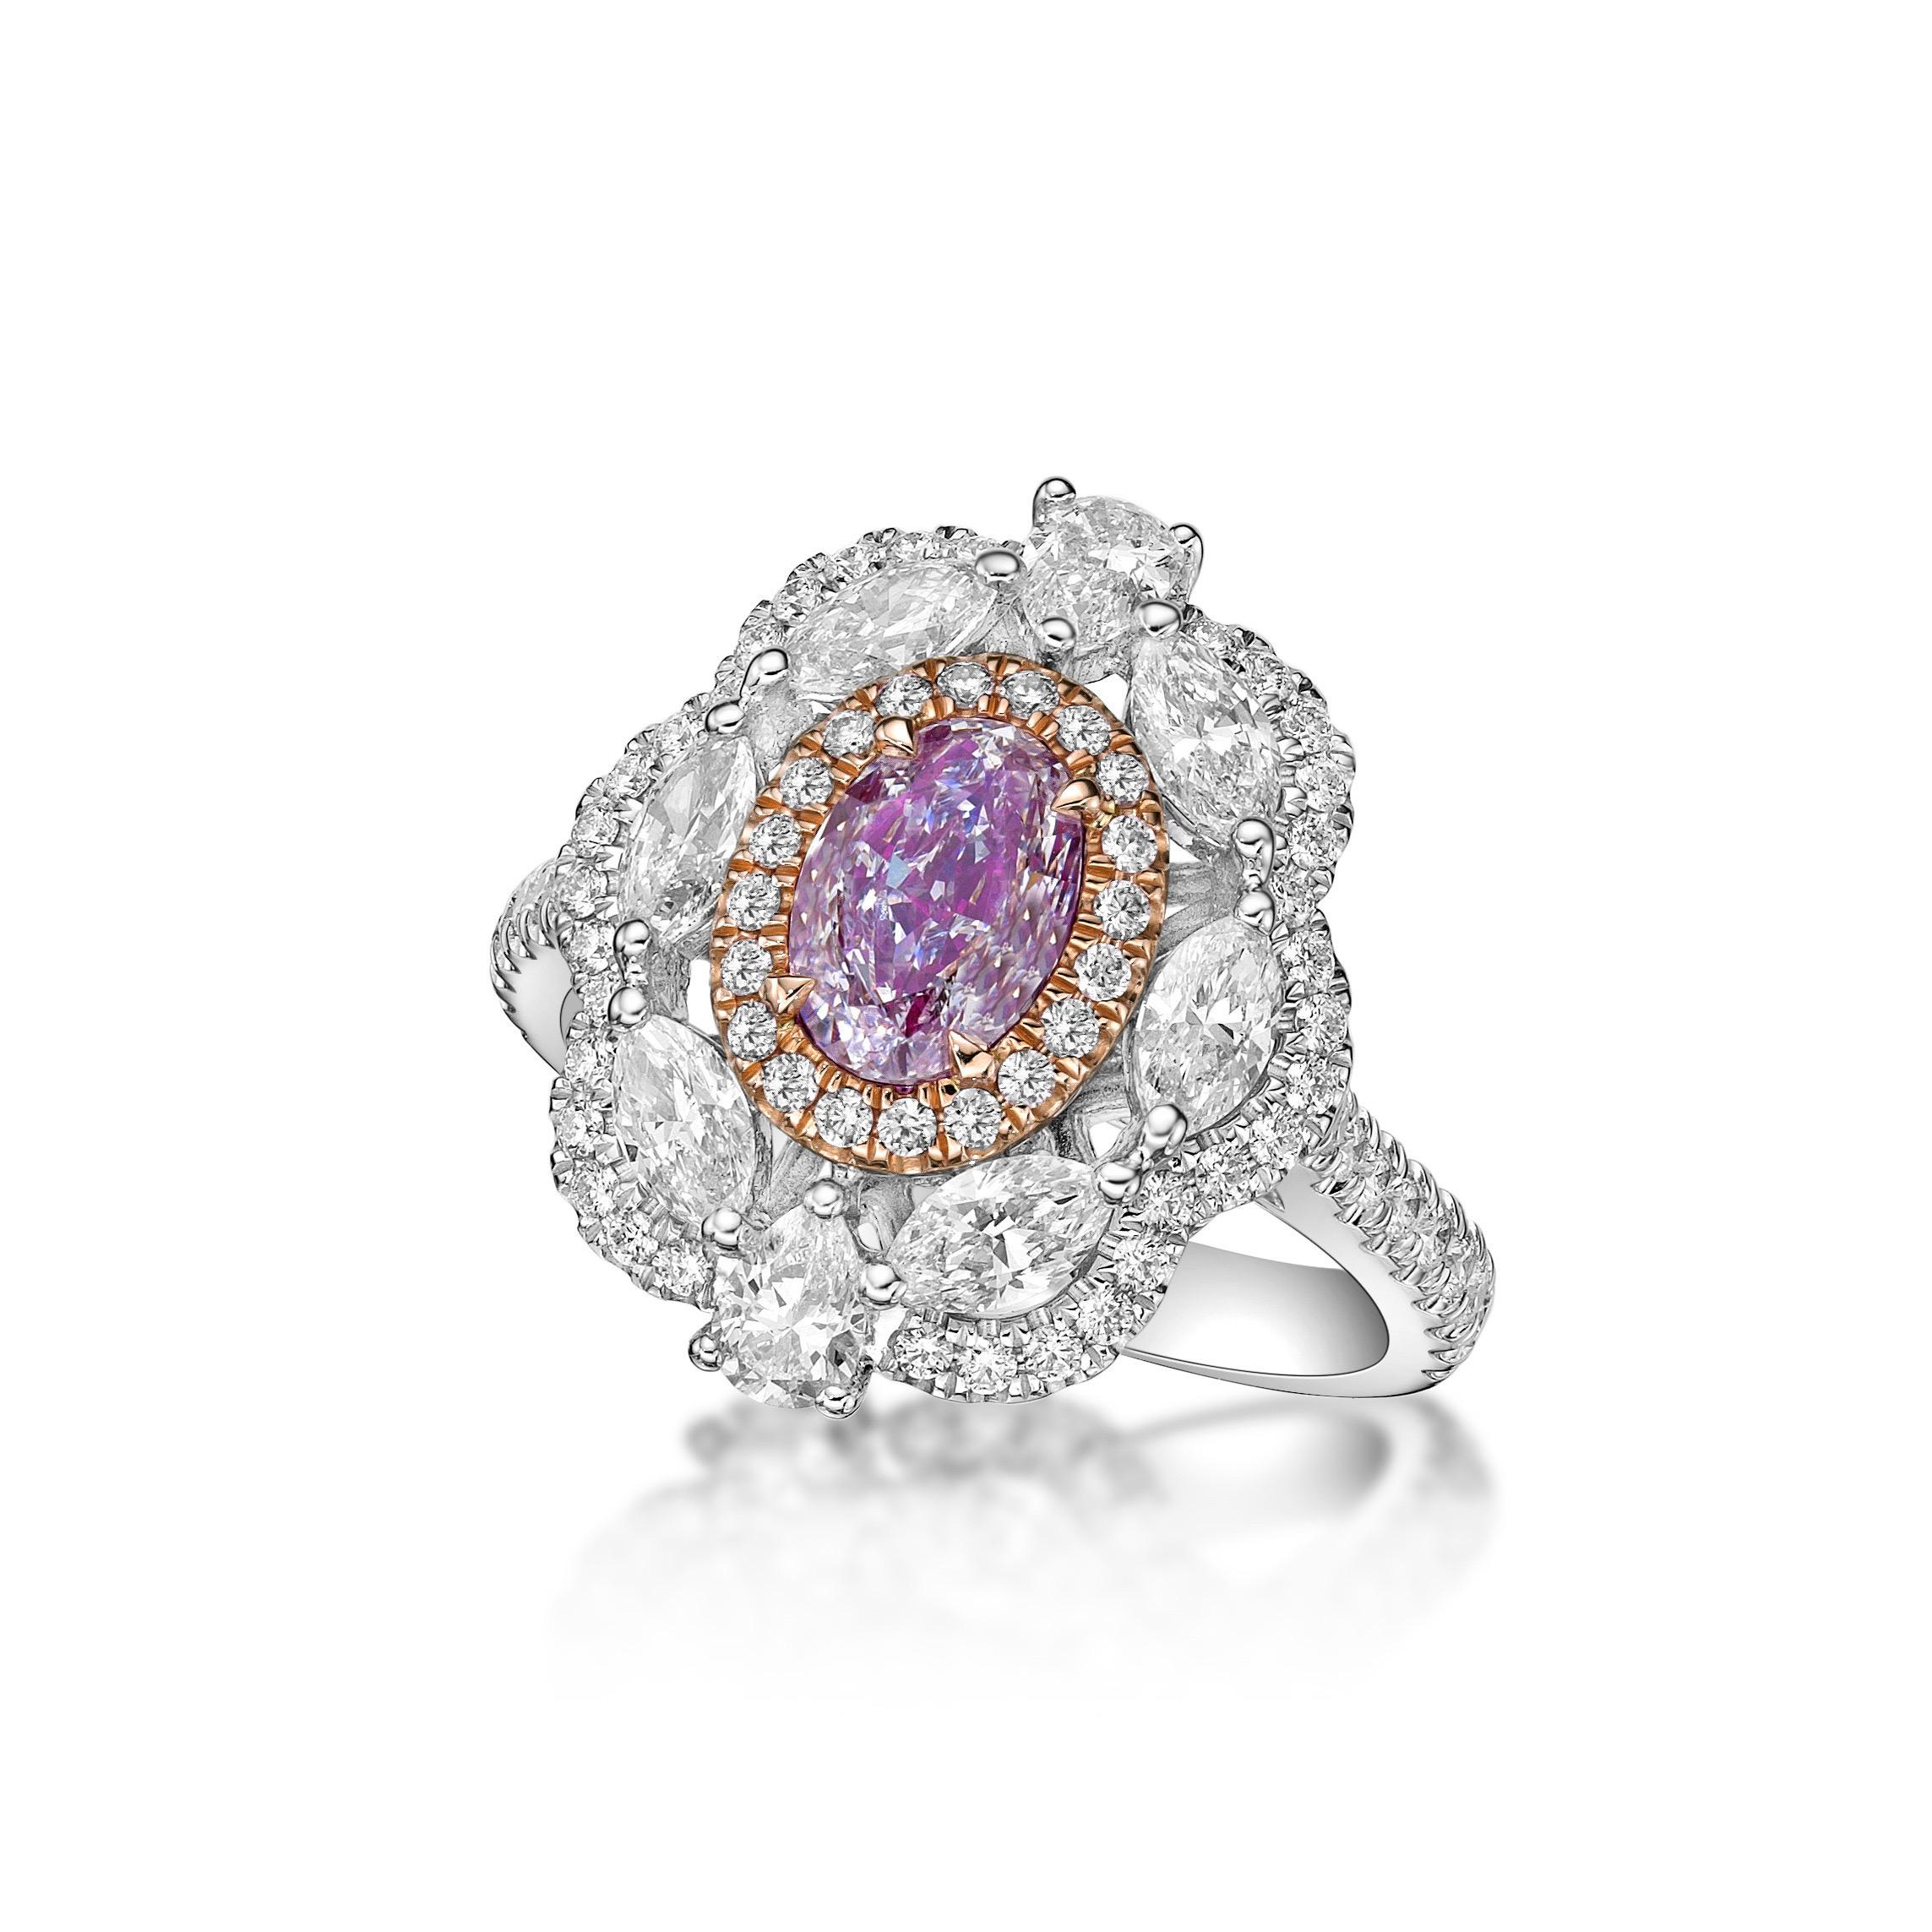 6 marquise diamonds 0.86ct
center: 1 oval purple diamond 1.08ct
2 diamonds total 0.30ct
72 diamonds total .51ct
From The Museum Vault at Emilio Jewelry Located on New York's iconic Fifth Avenue,
Showcasing a very special and rare Gia certified